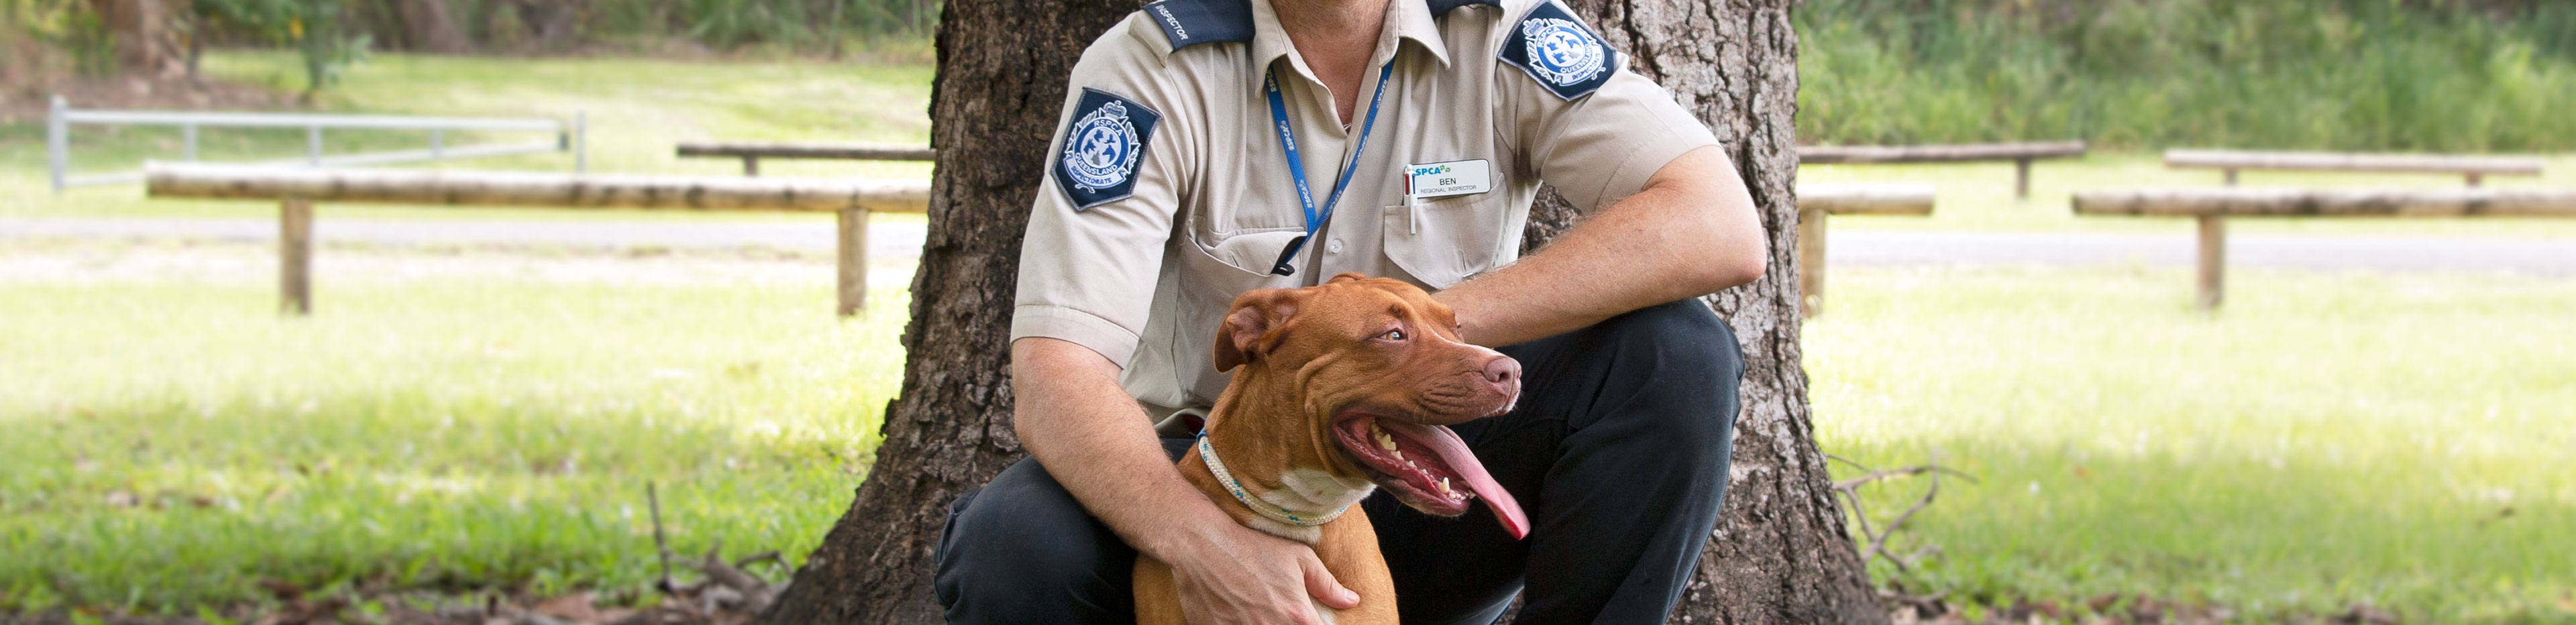 rspca inspector with dog